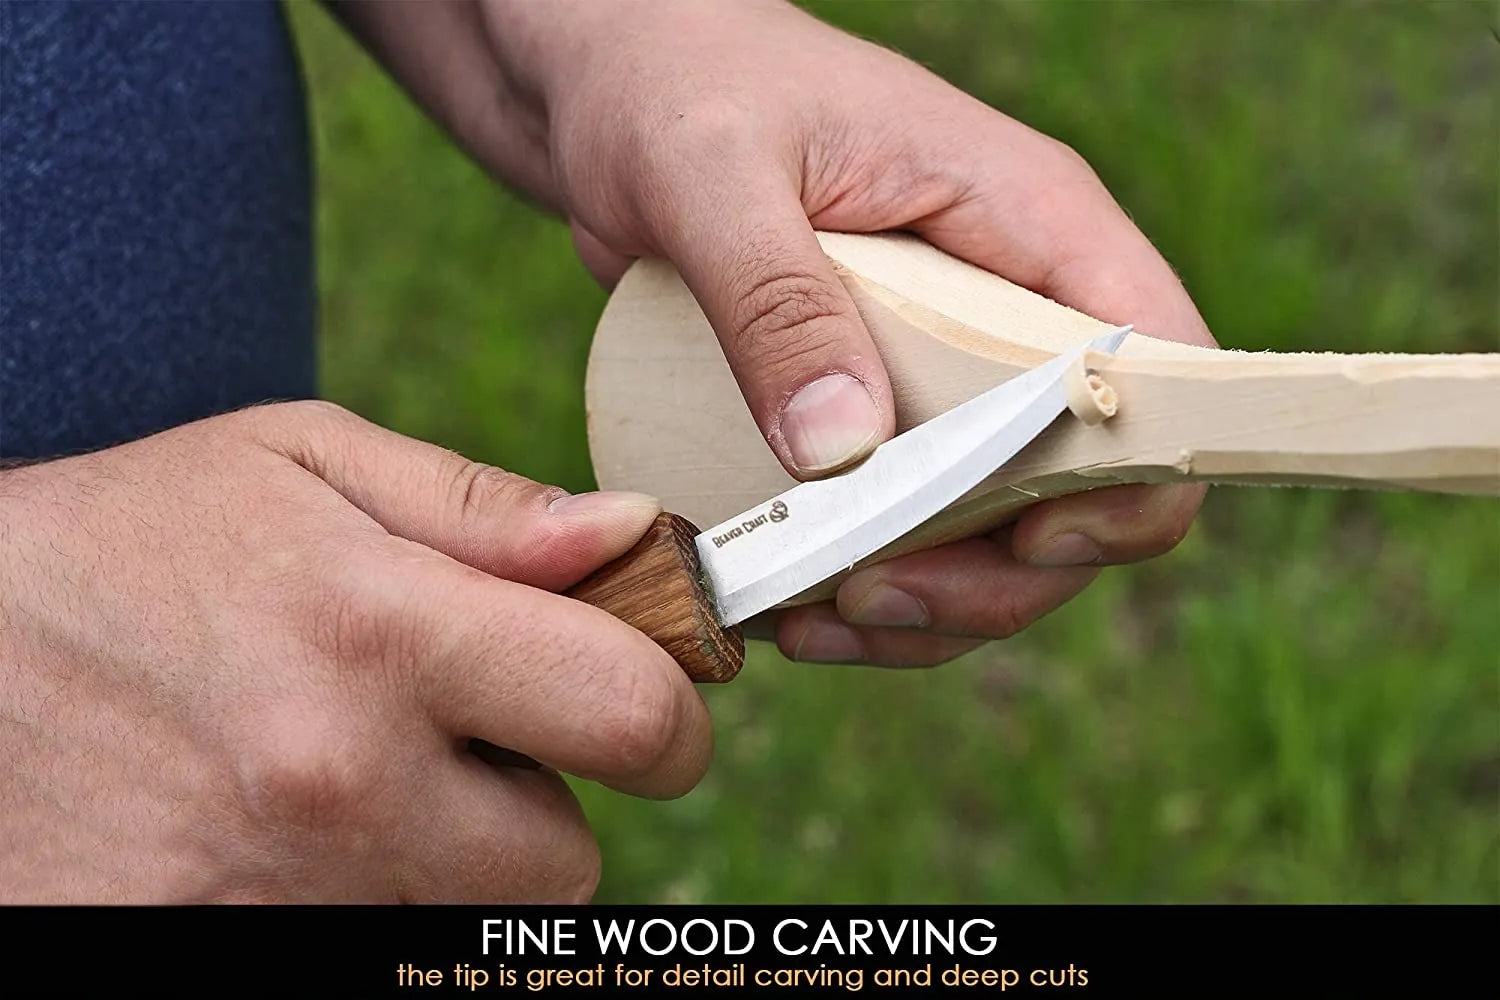 WHITTLING KNIFE C4m forged carving chisels Bushcraft, Living History,  Crafts We make history come alive!